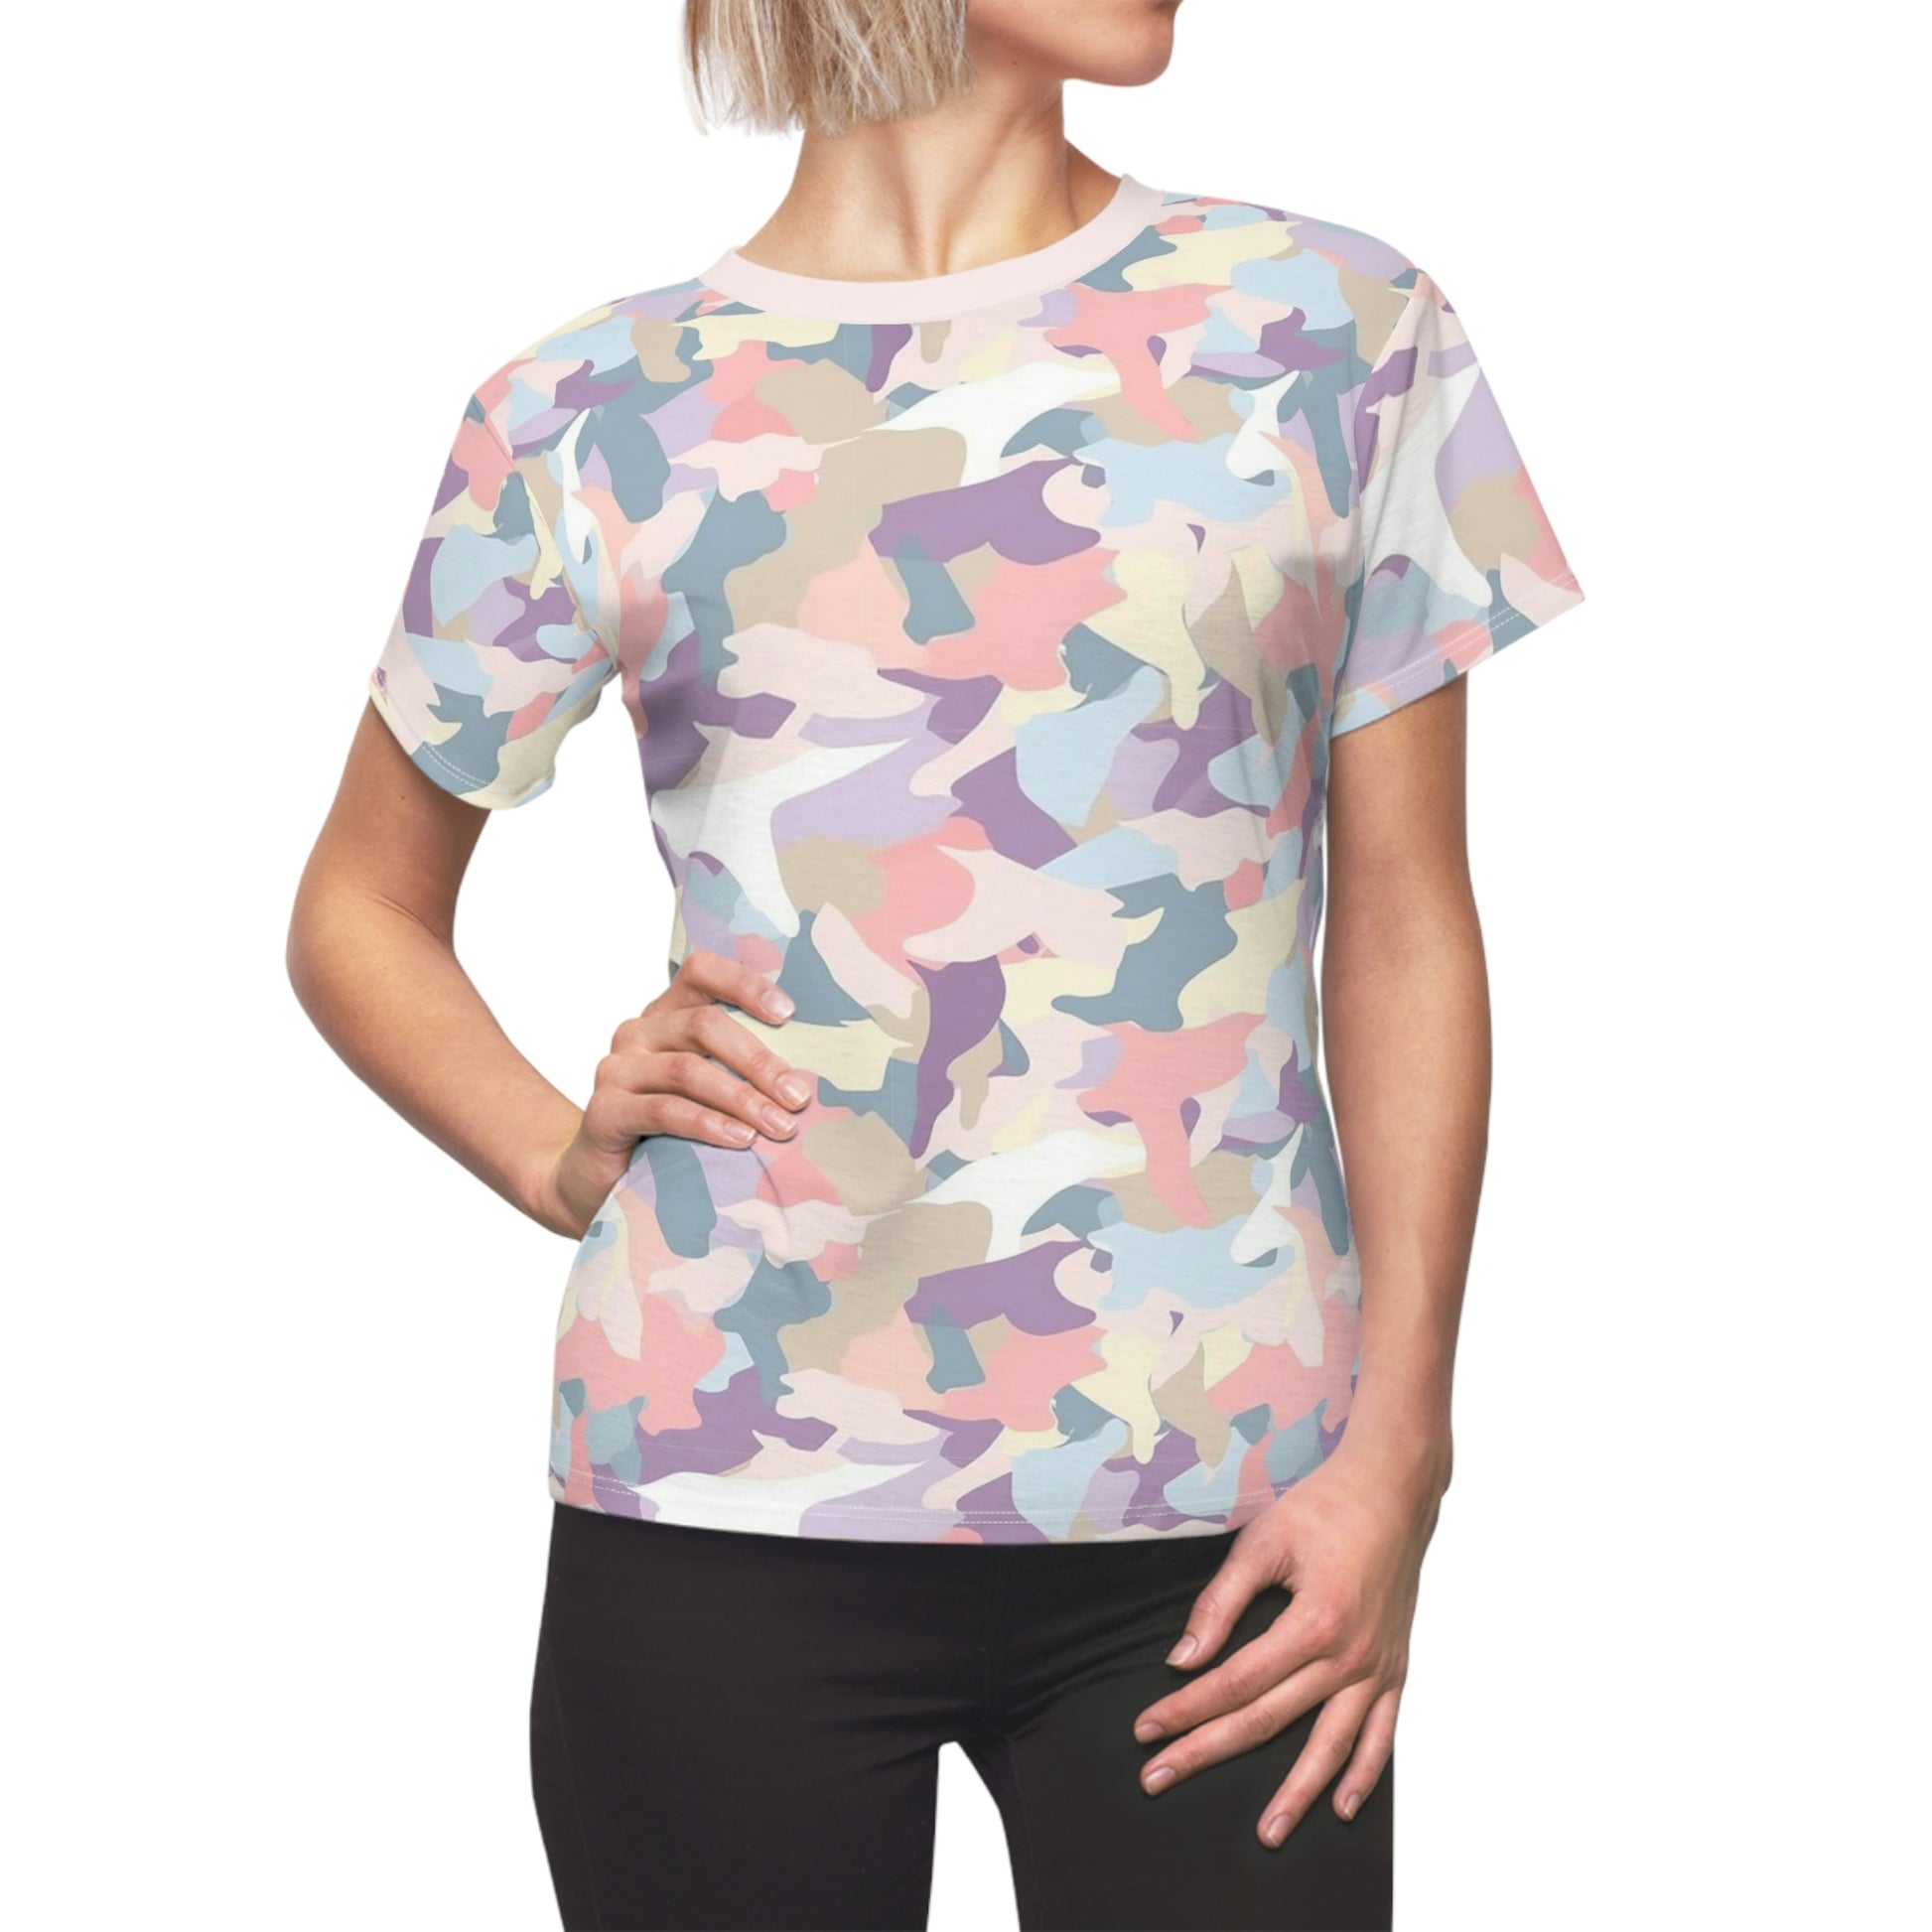 Pastel Camo Women Tshirt, Camouflage Pink Designer Adult Graphic Aesthetic Fashion Fitted Crewneck Tee Shirt Top Starcove Fashion